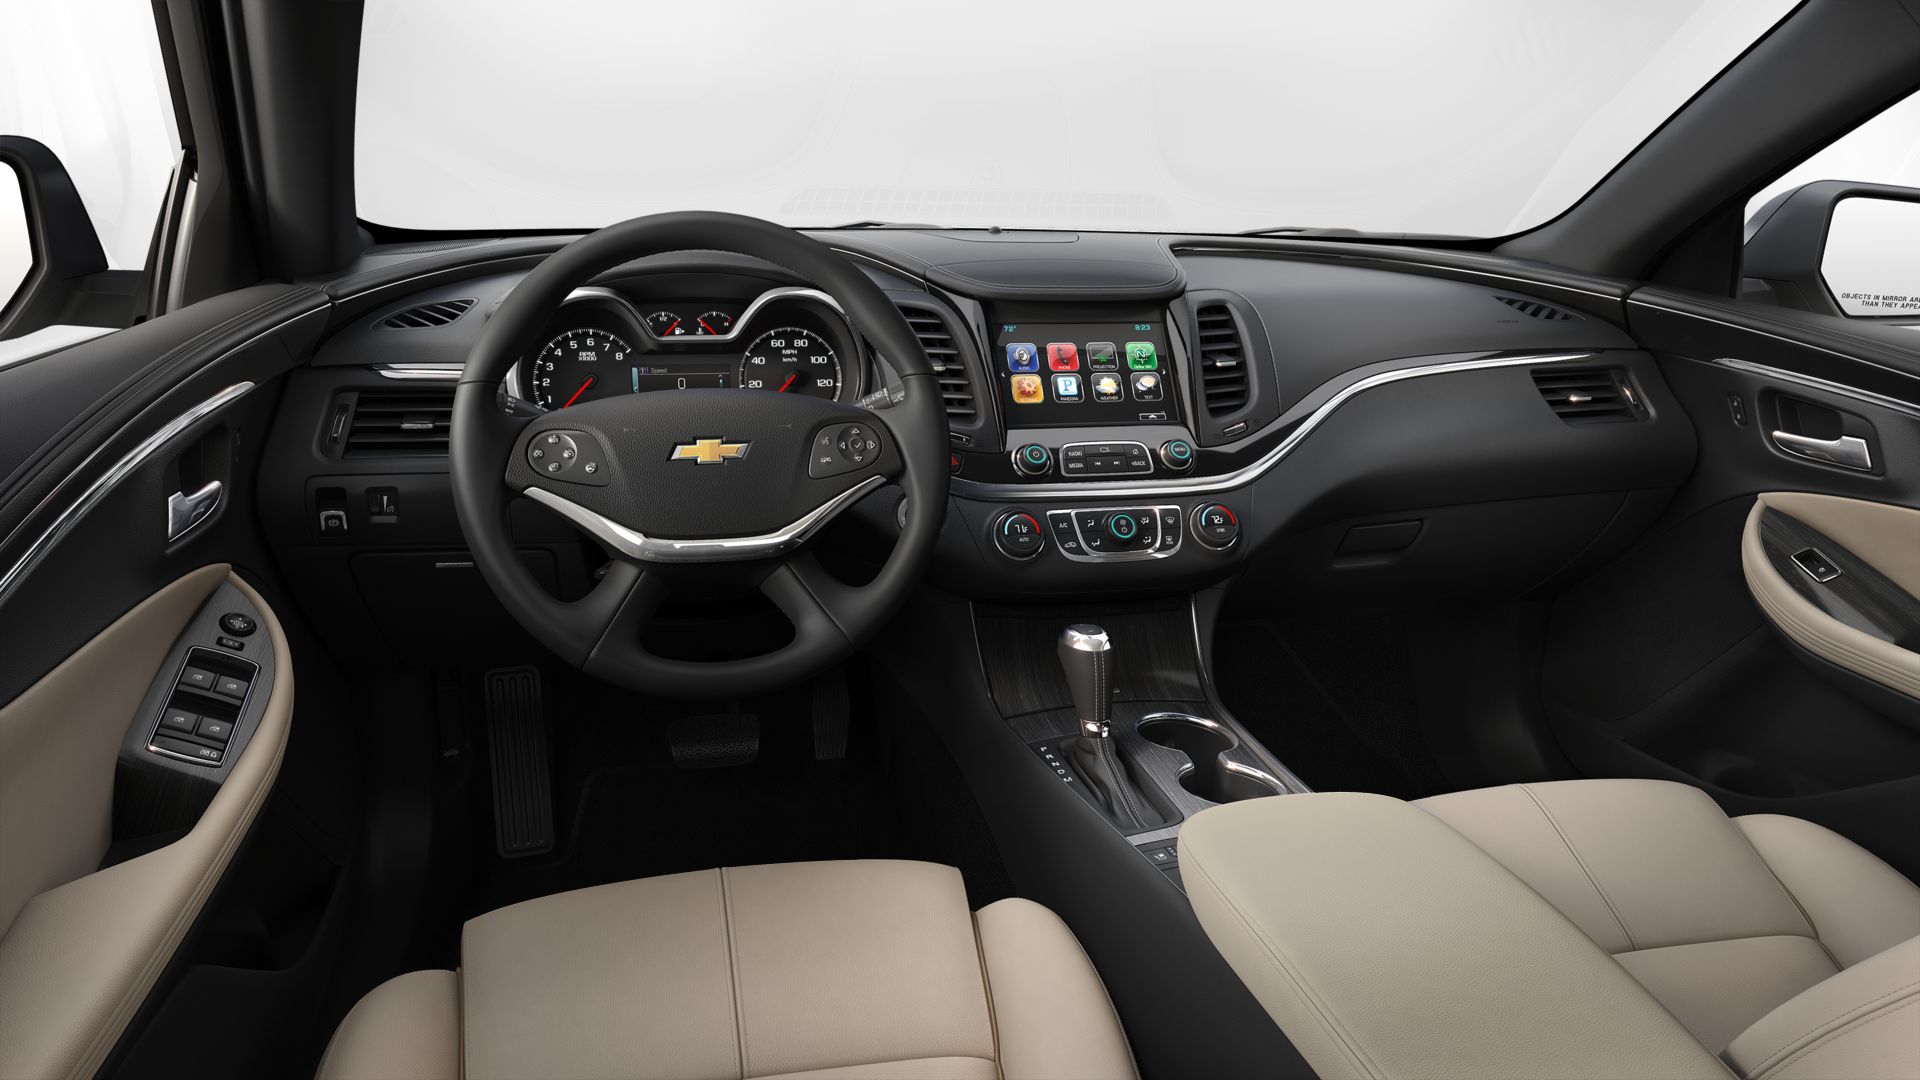 Get used to sufficient Transplant 2019 Chevrolet Impala Interior Colors | GM Authority